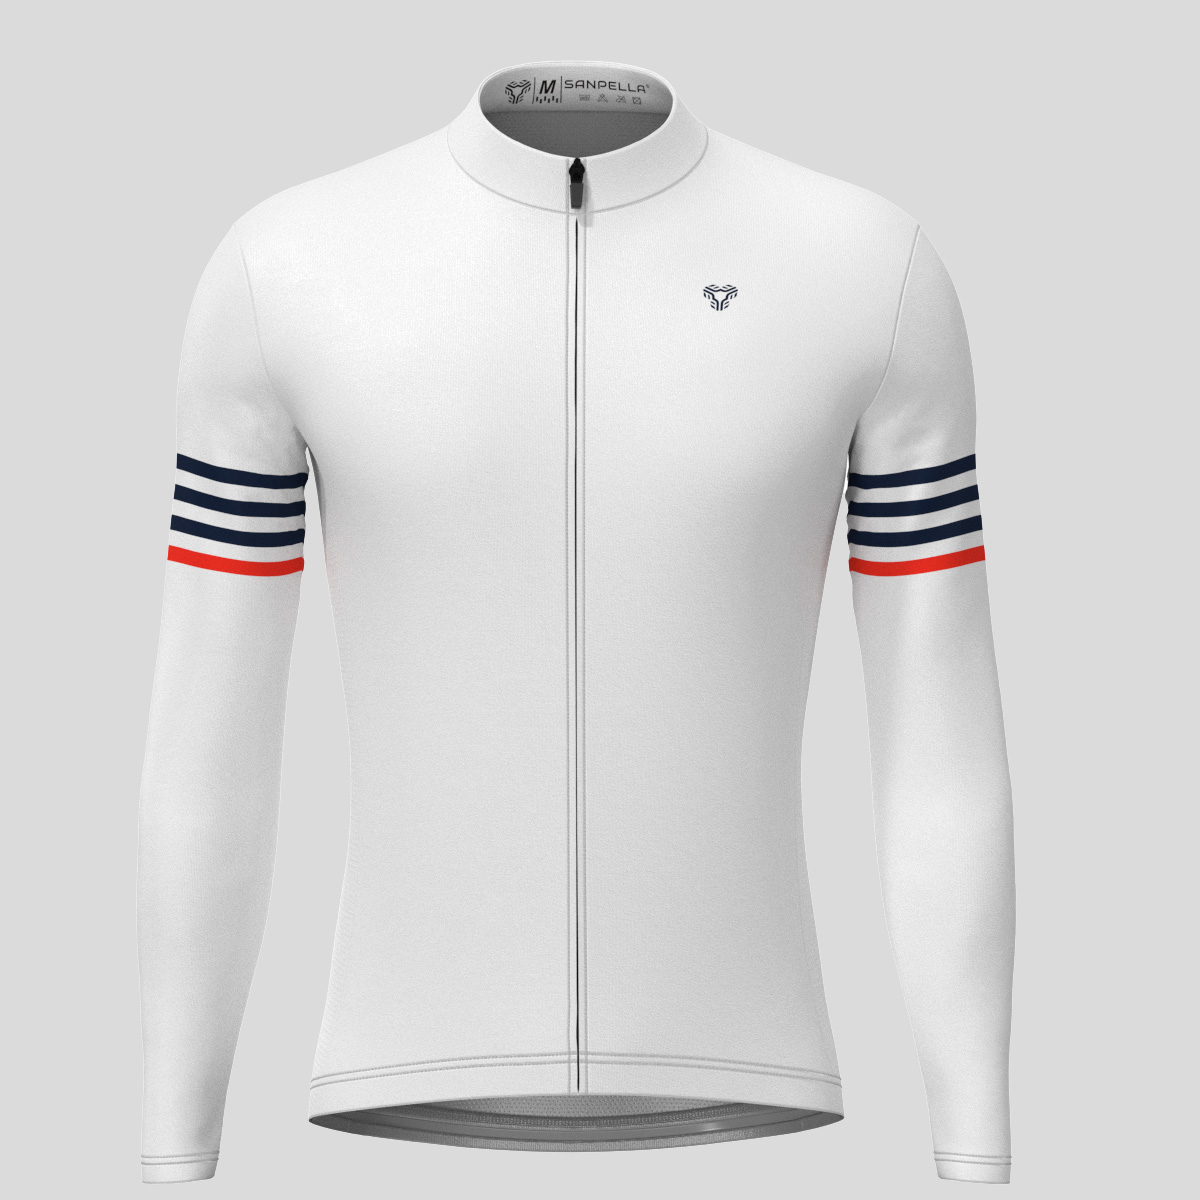 Minimal Stripes Men's LS Cycling Jersey - White/Navy/Red